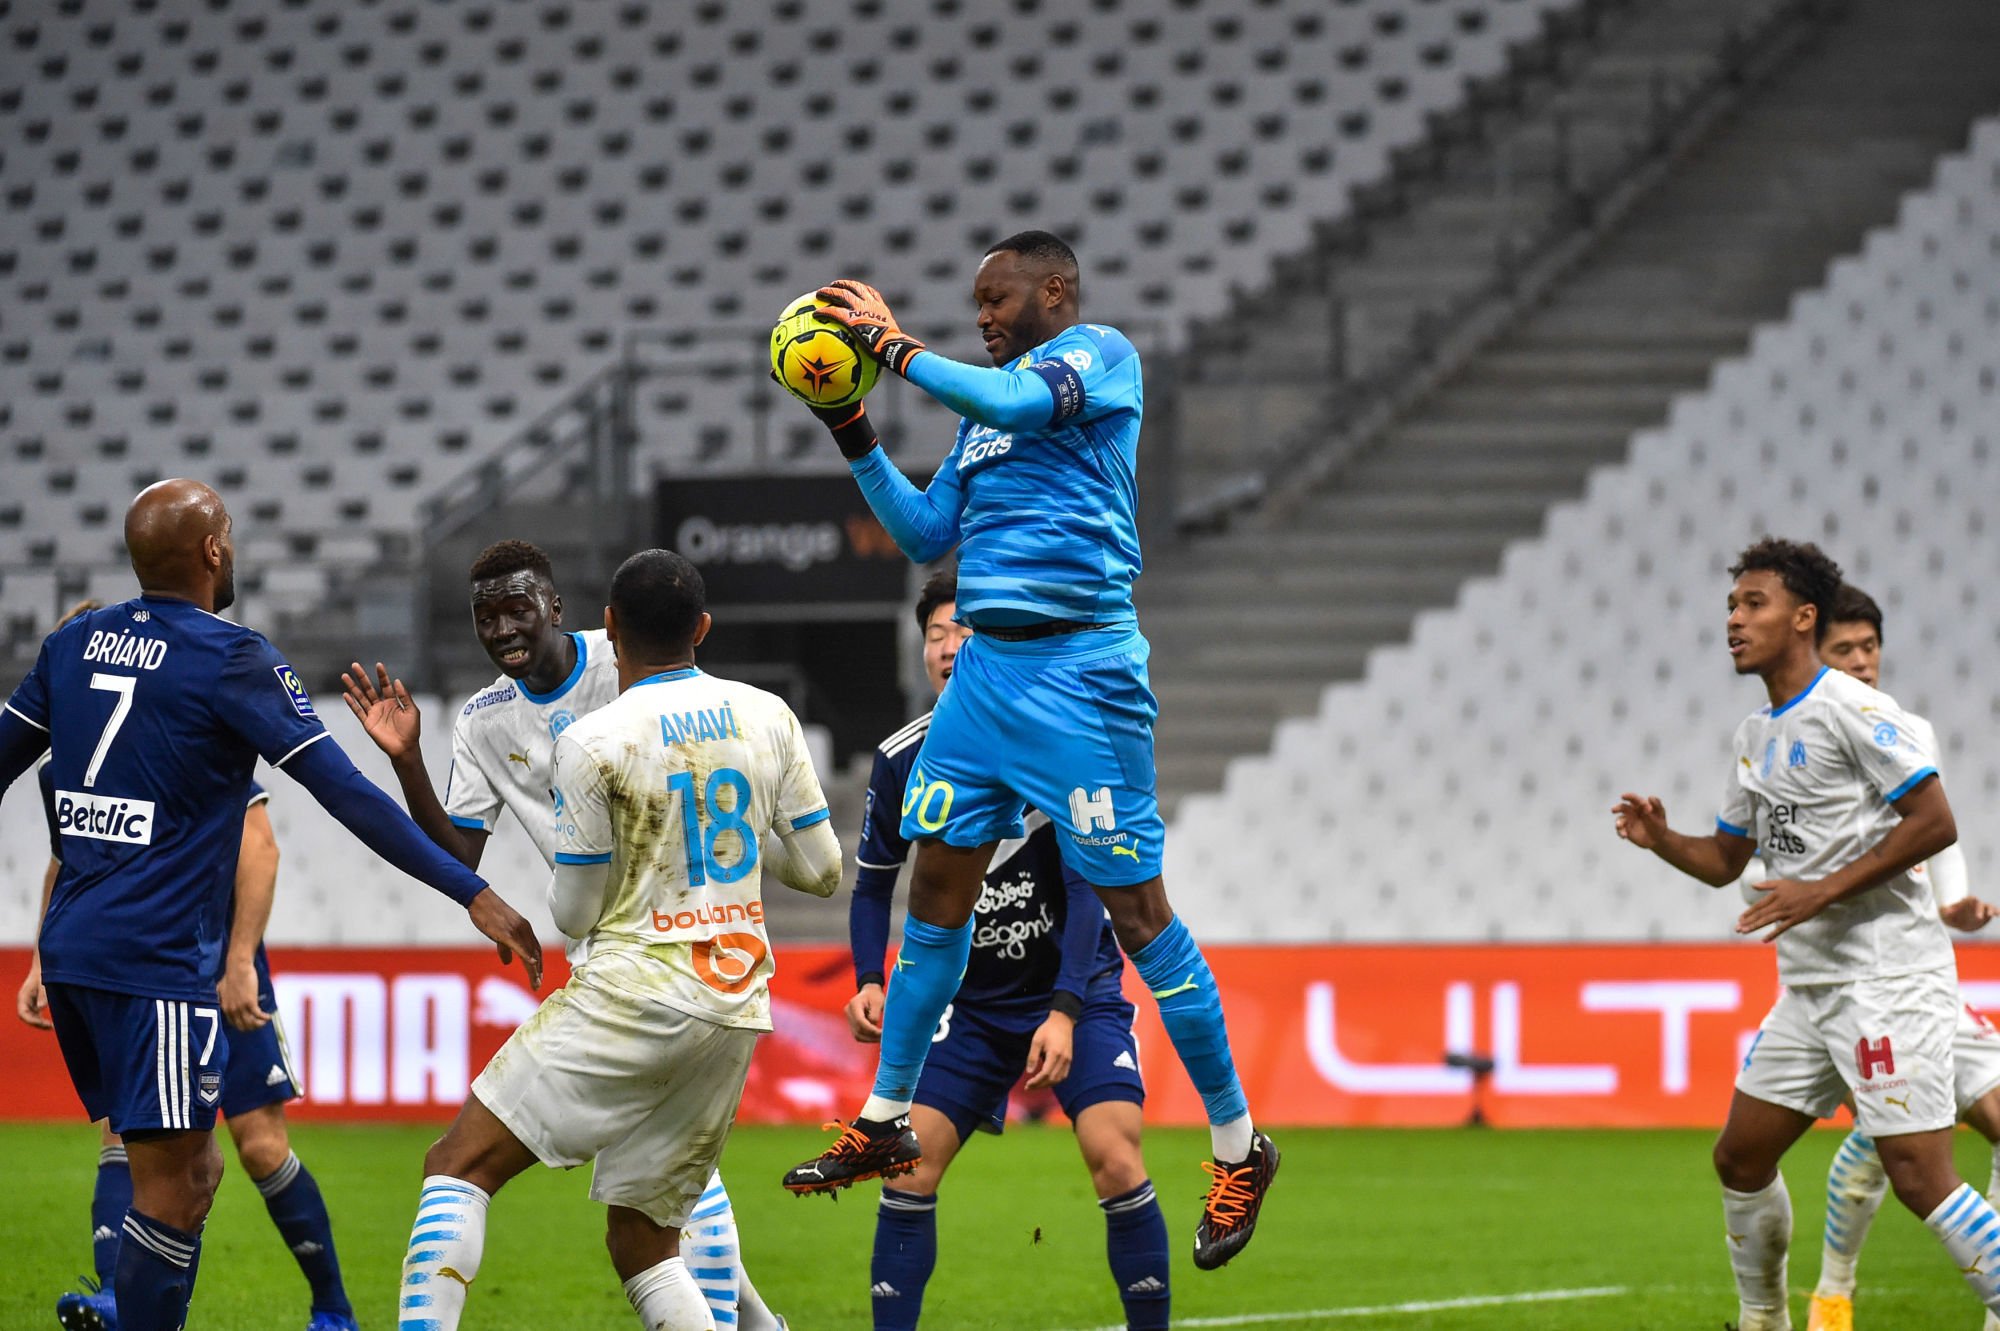 Steve MANDANDA of Marseille  during the Ligue 1 match between Olympique Marseille and Girondins Bordeaux at Stade Velodrome on October 17, 2020 in Marseille, France. (Photo by Alexandre Dimou/Icon Sport) - Steve MANDANDA - Orange Vélodrome - Marseille (France)